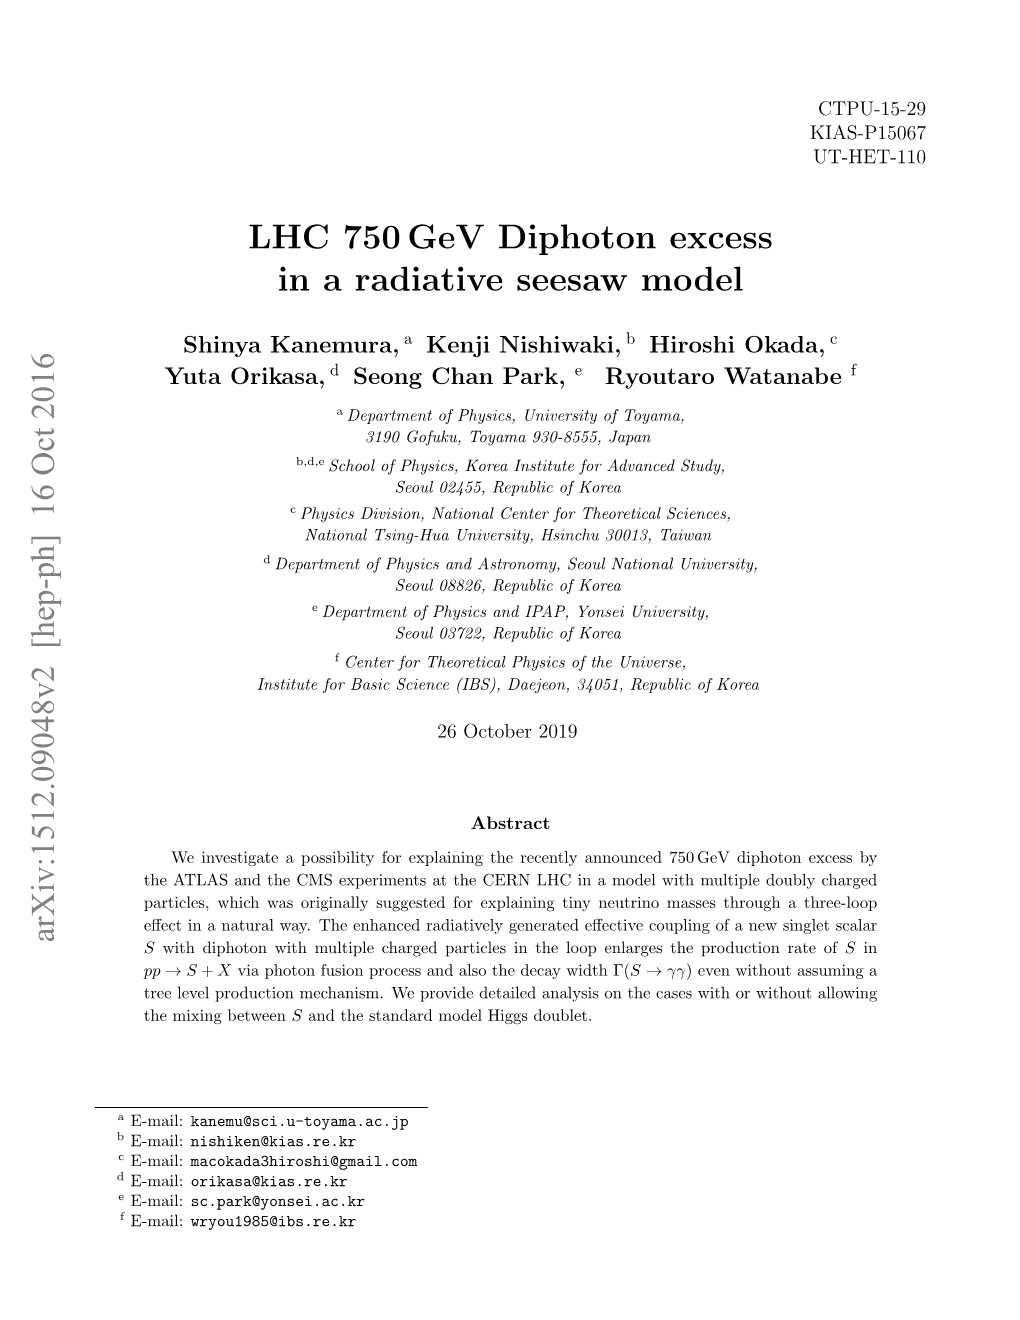 LHC 750 Gev Diphoton Excess in a Radiative Seesaw Model Arxiv